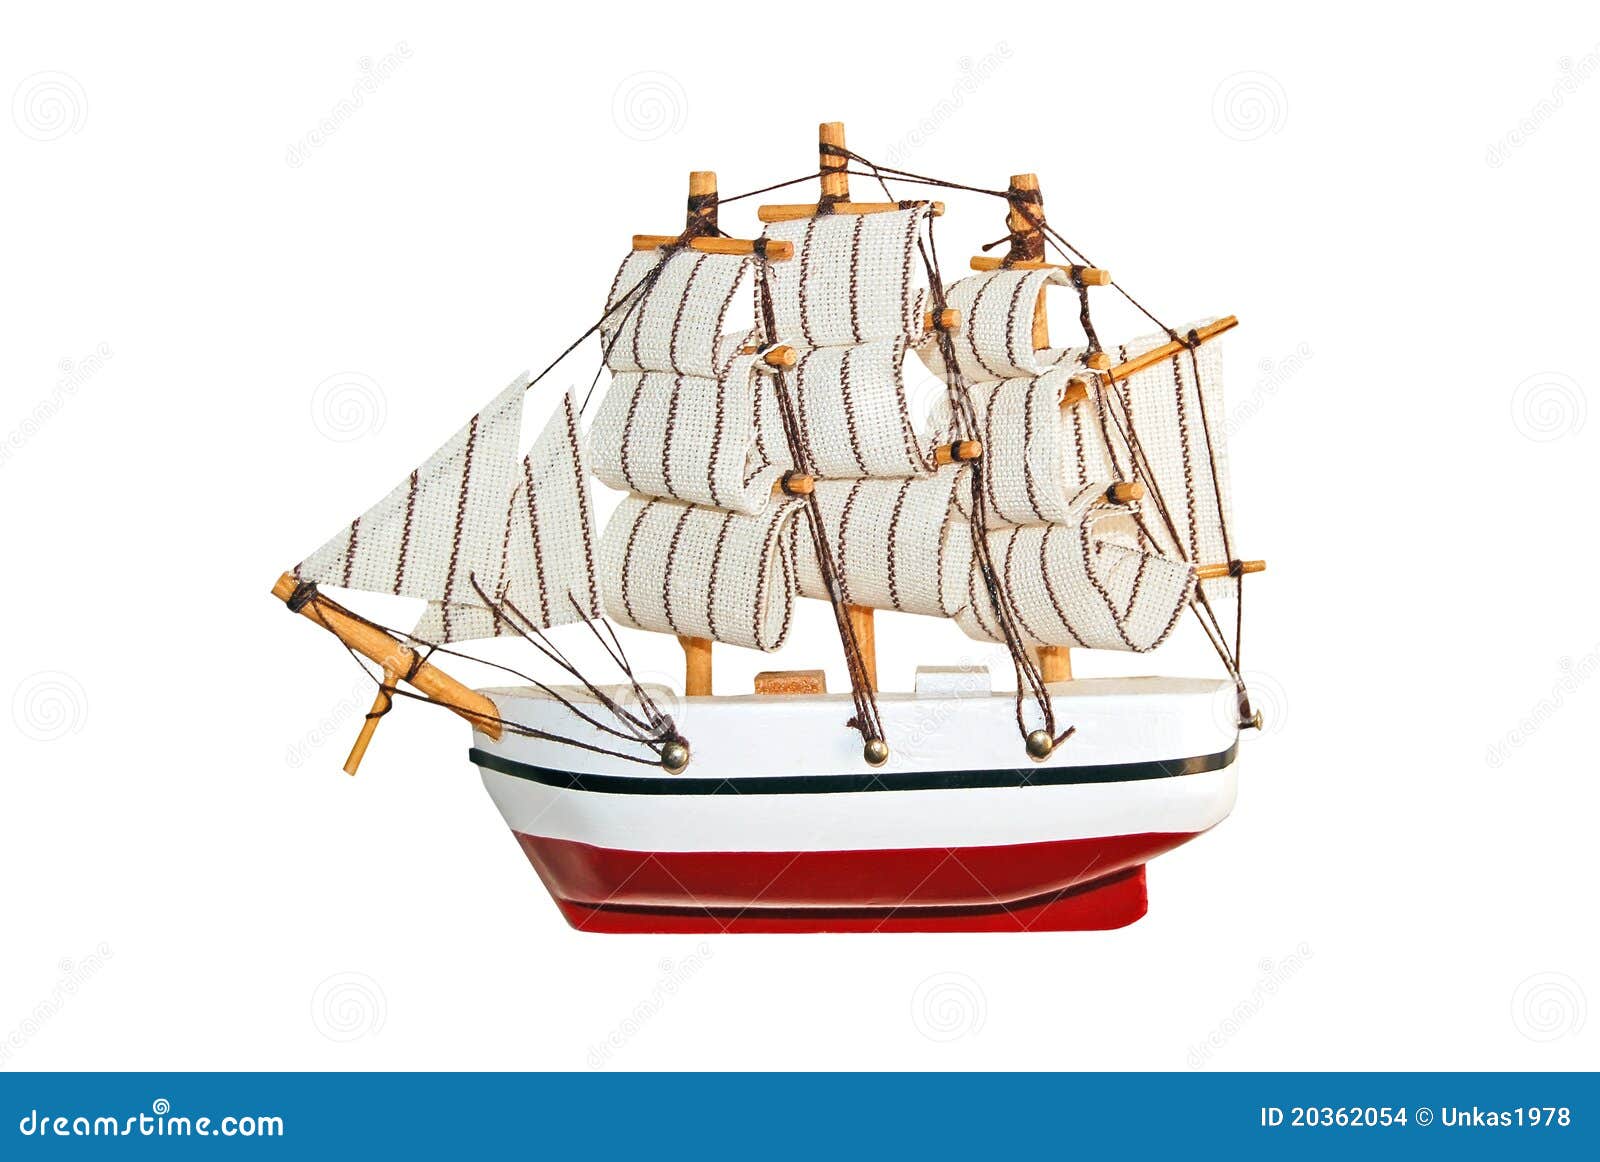 Wooden Ship Toy Model Stock Images - Image: 20362054